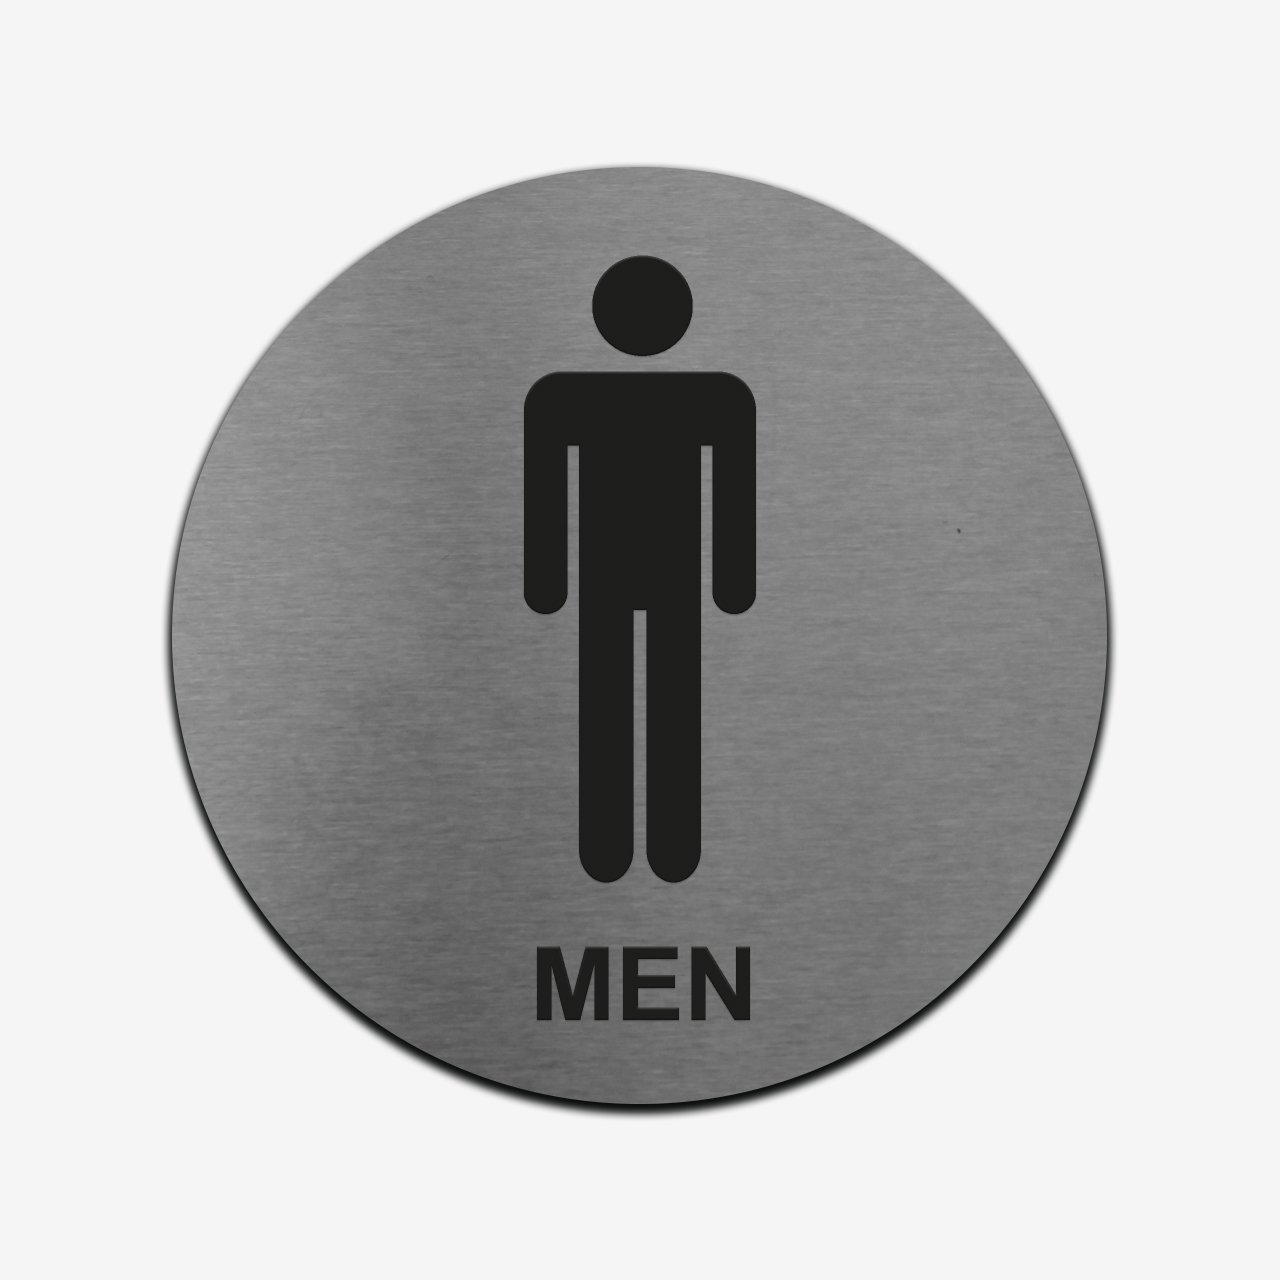 Man WC - Stainless Steel Sign Bathroom Signs circle Bsign